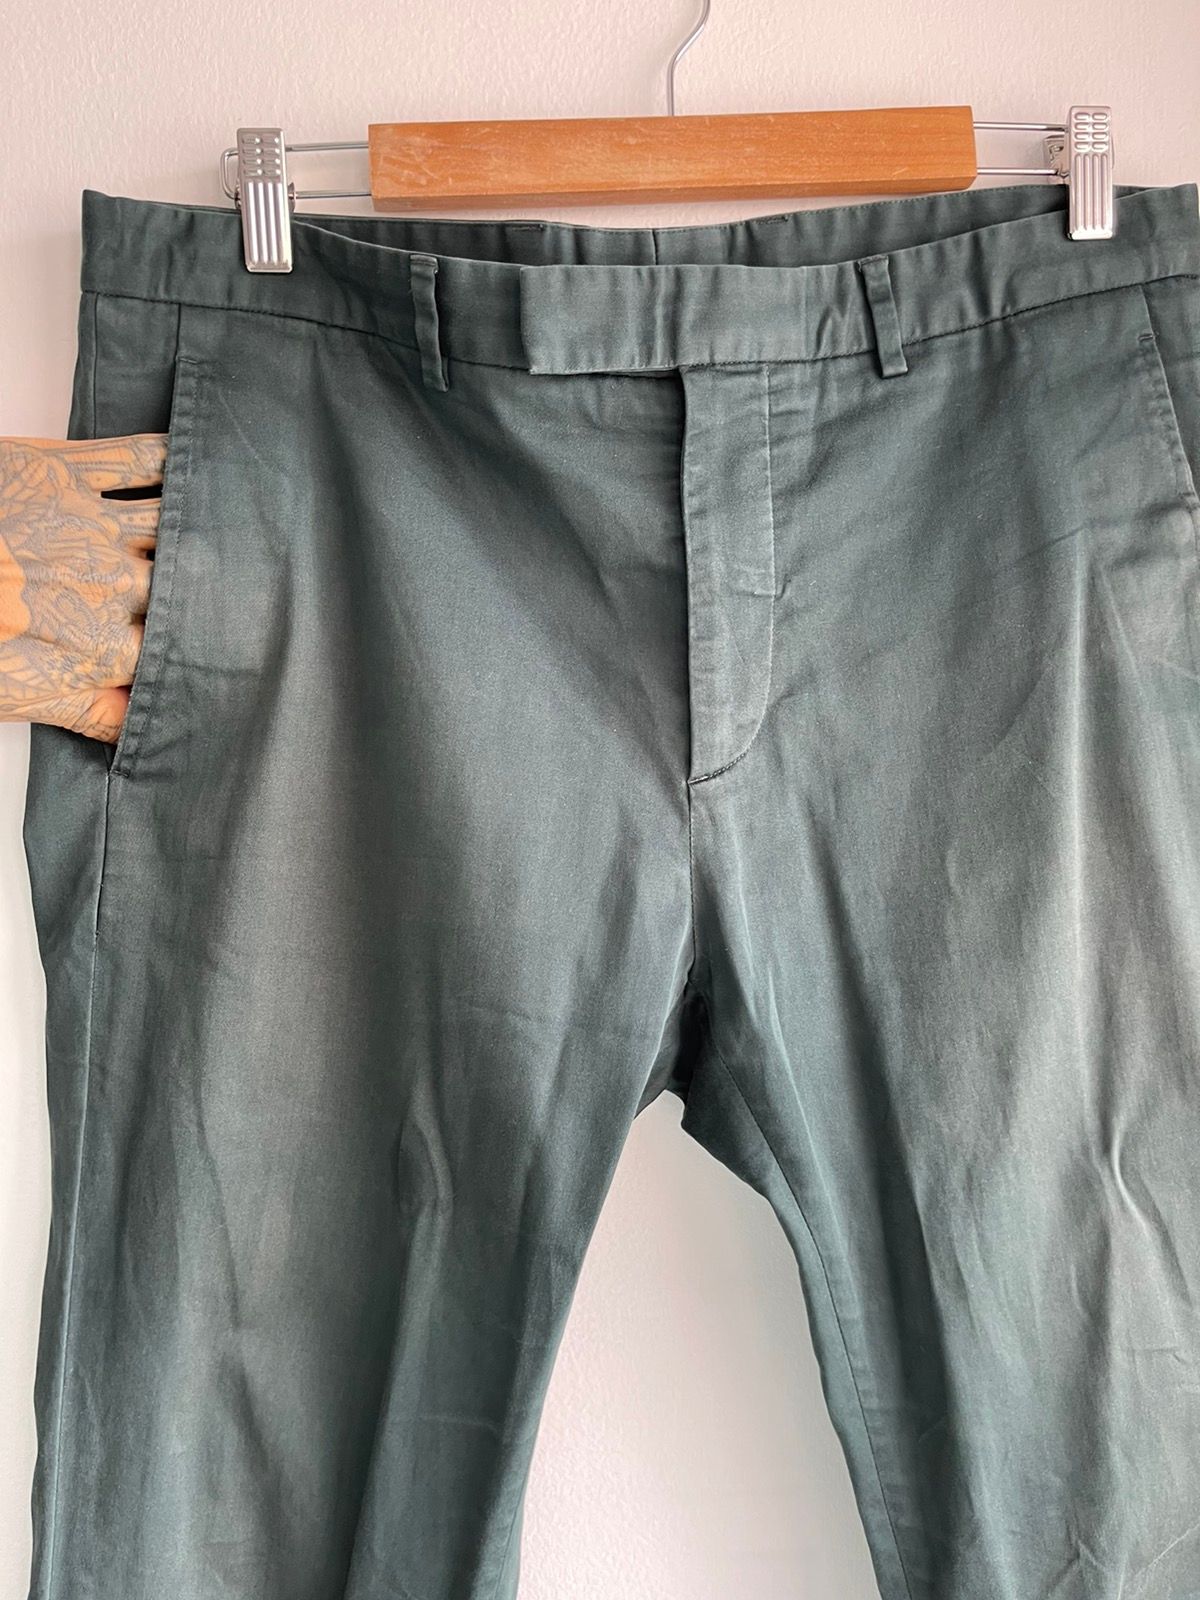 Dior Homme Forrest Green Chino Skate Pants SICK !